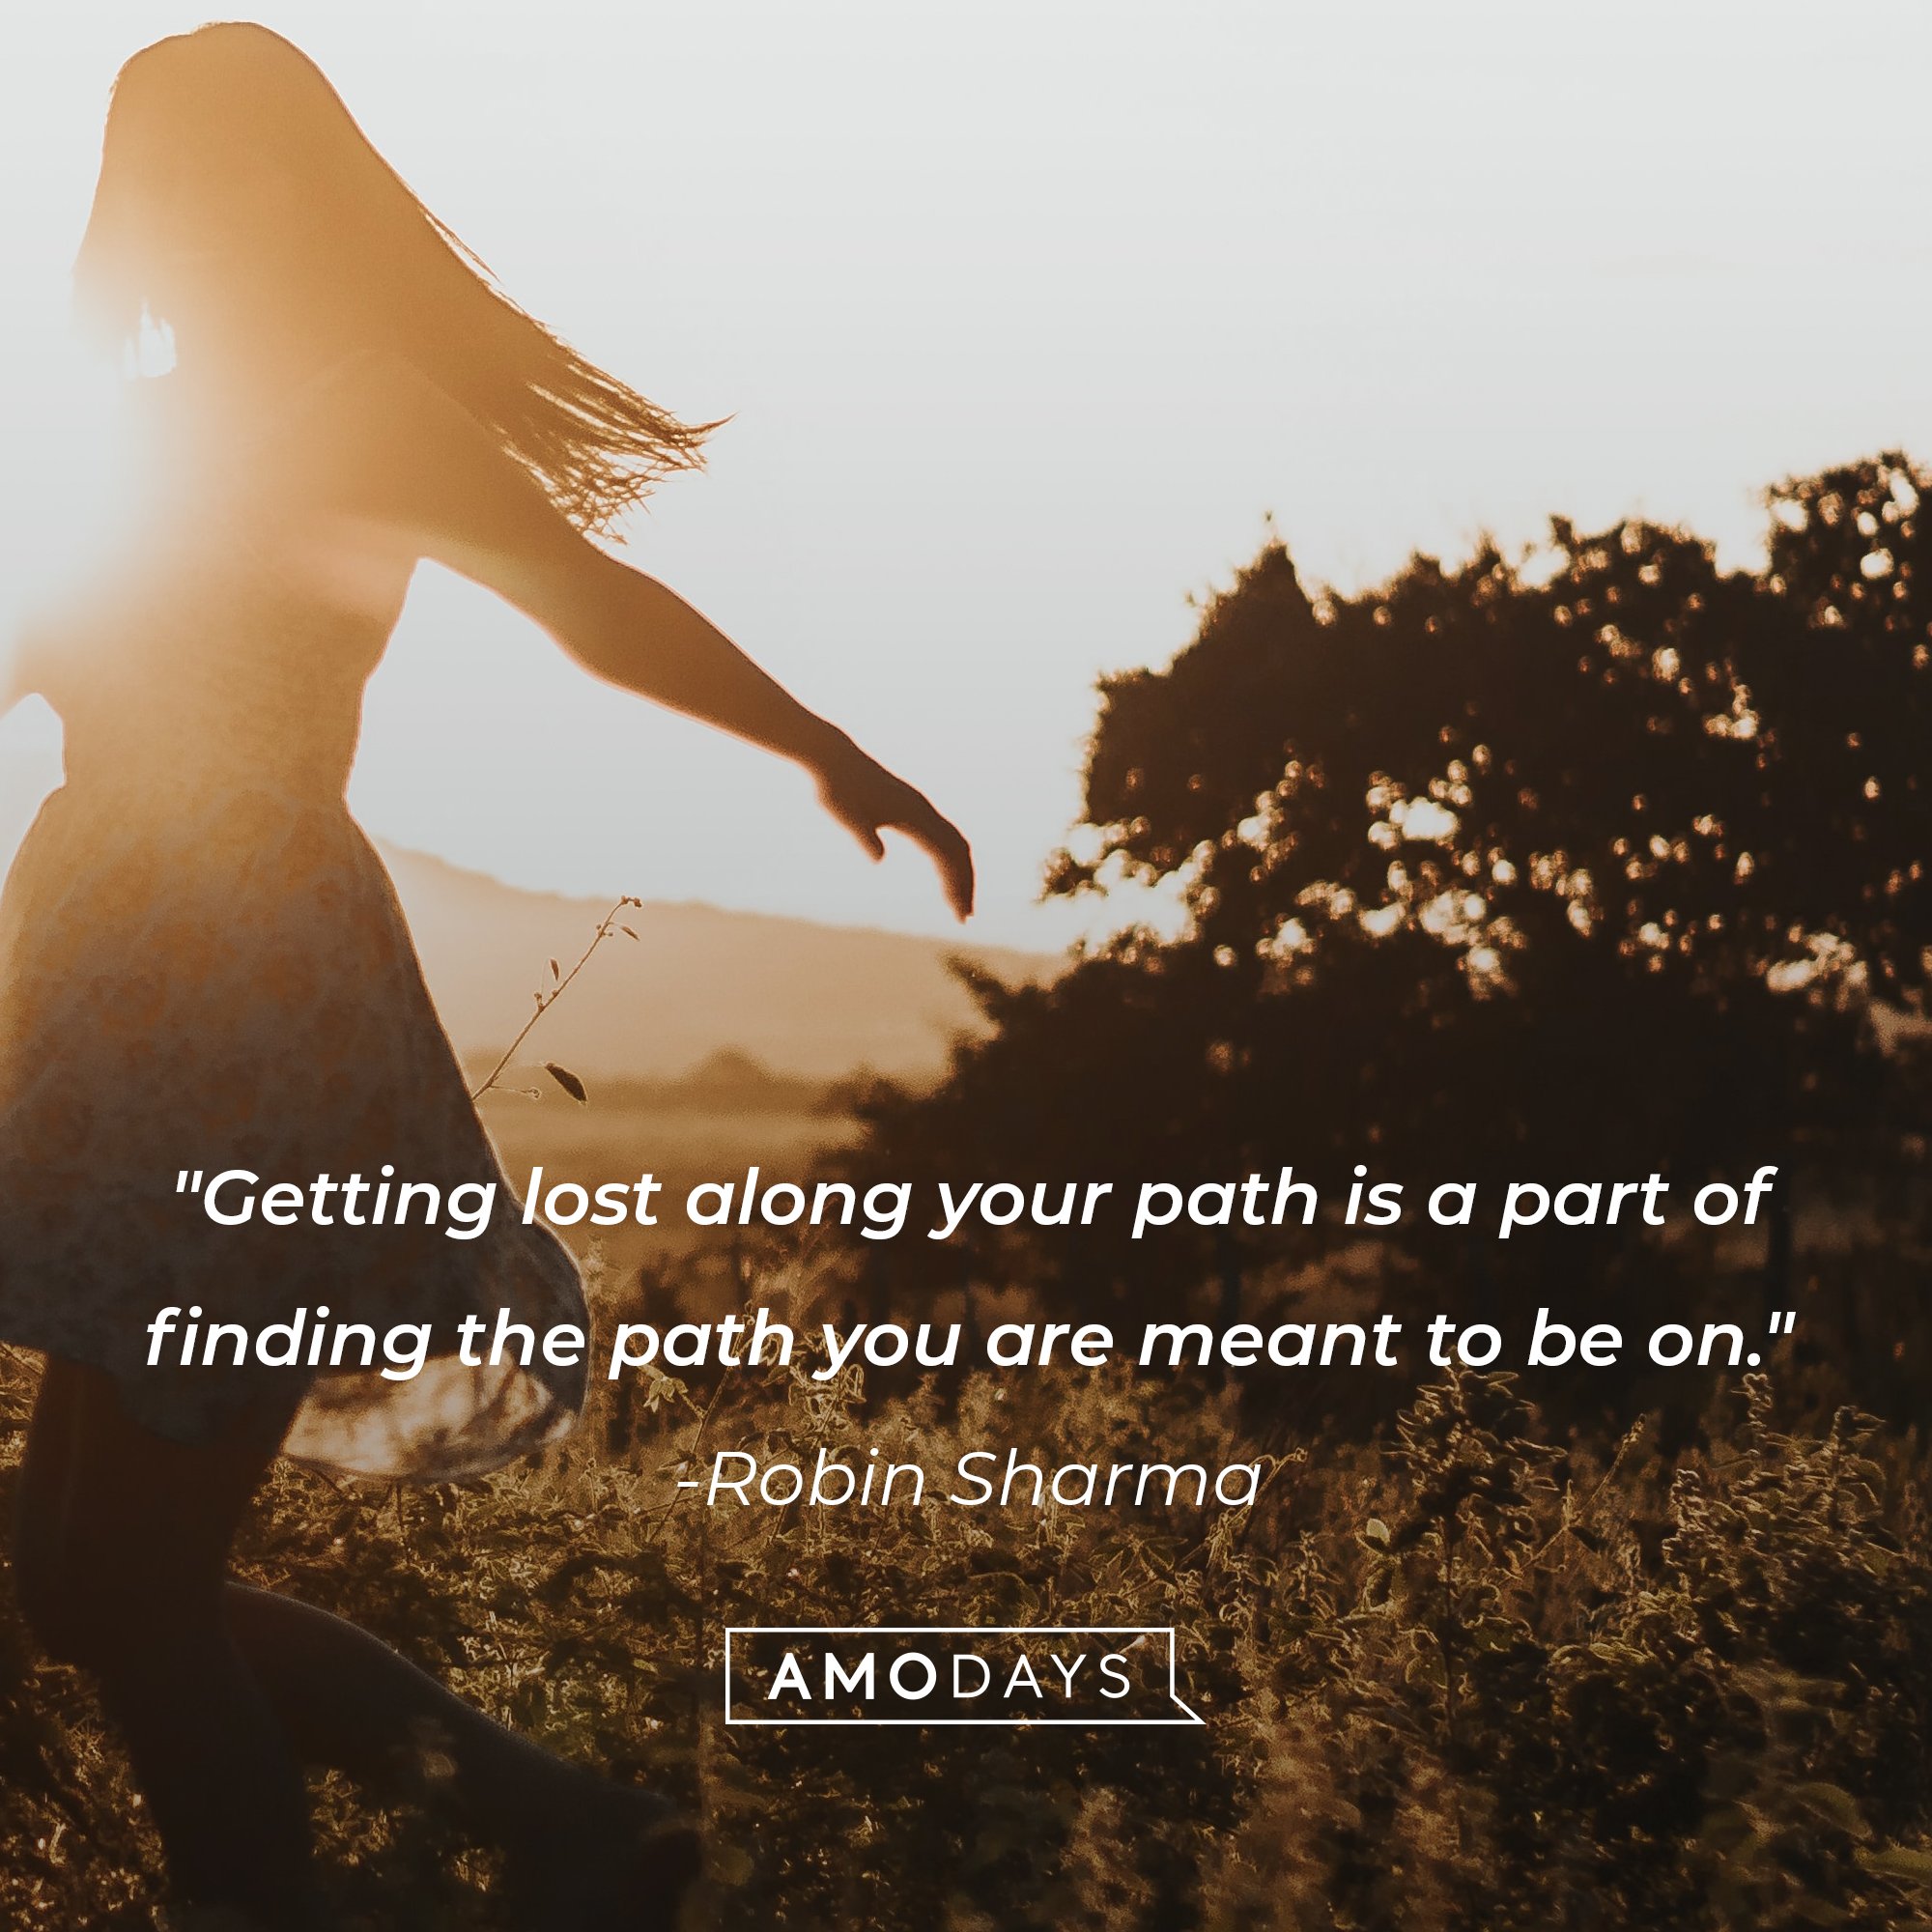 Robin Sharma’s quote: "Getting lost along your path is a part of finding the path you are meant to be on."  | Image: AmoDays 